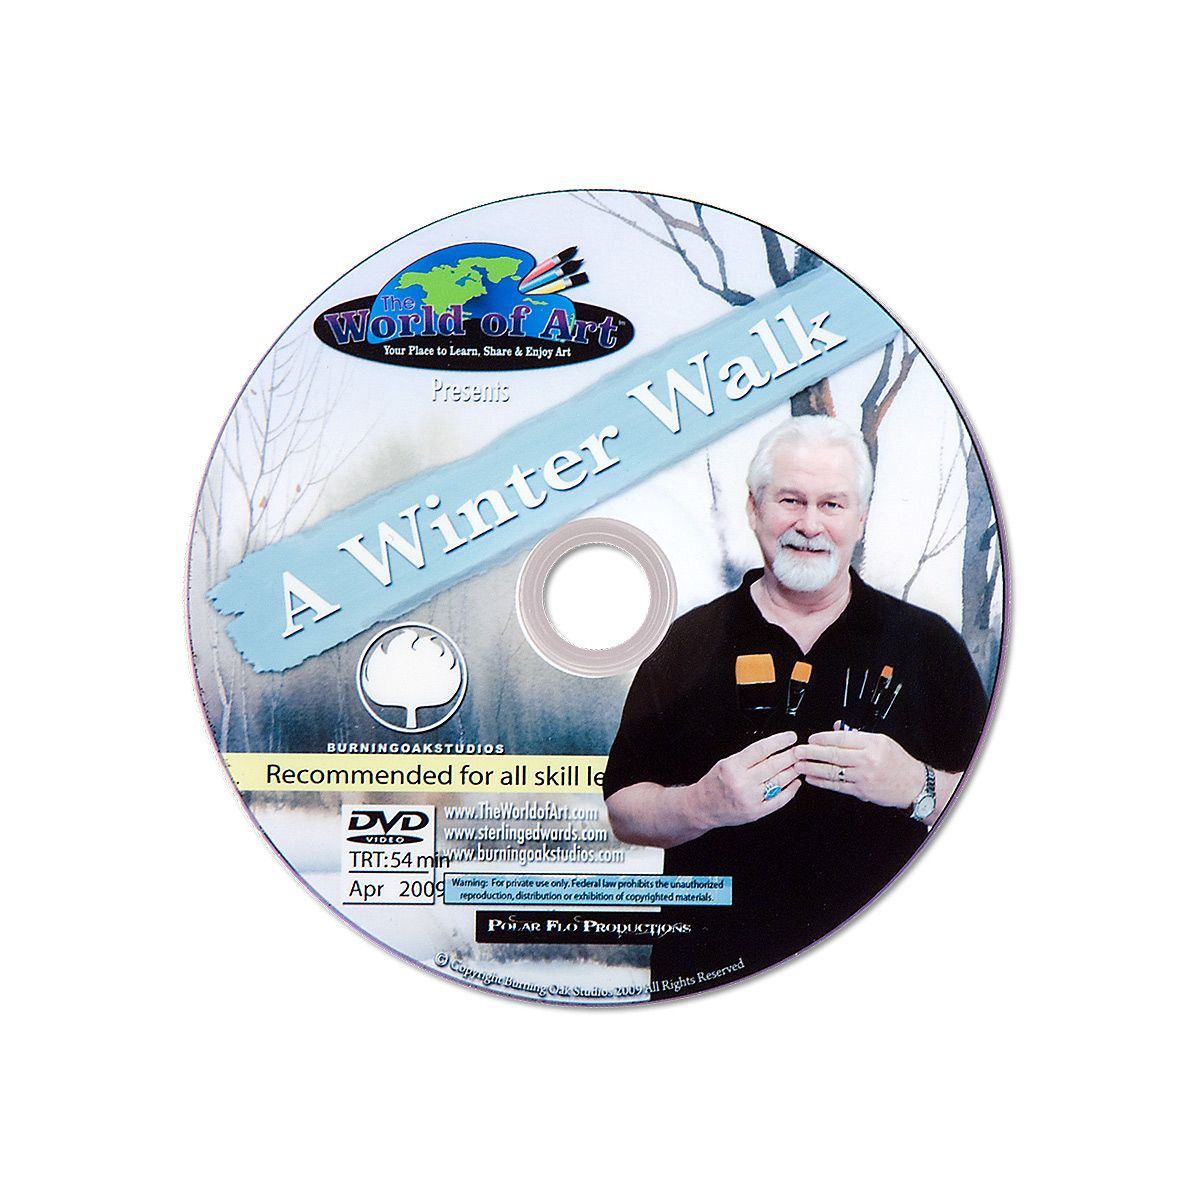 Join Sterling and learn a bunch with thus included DVD